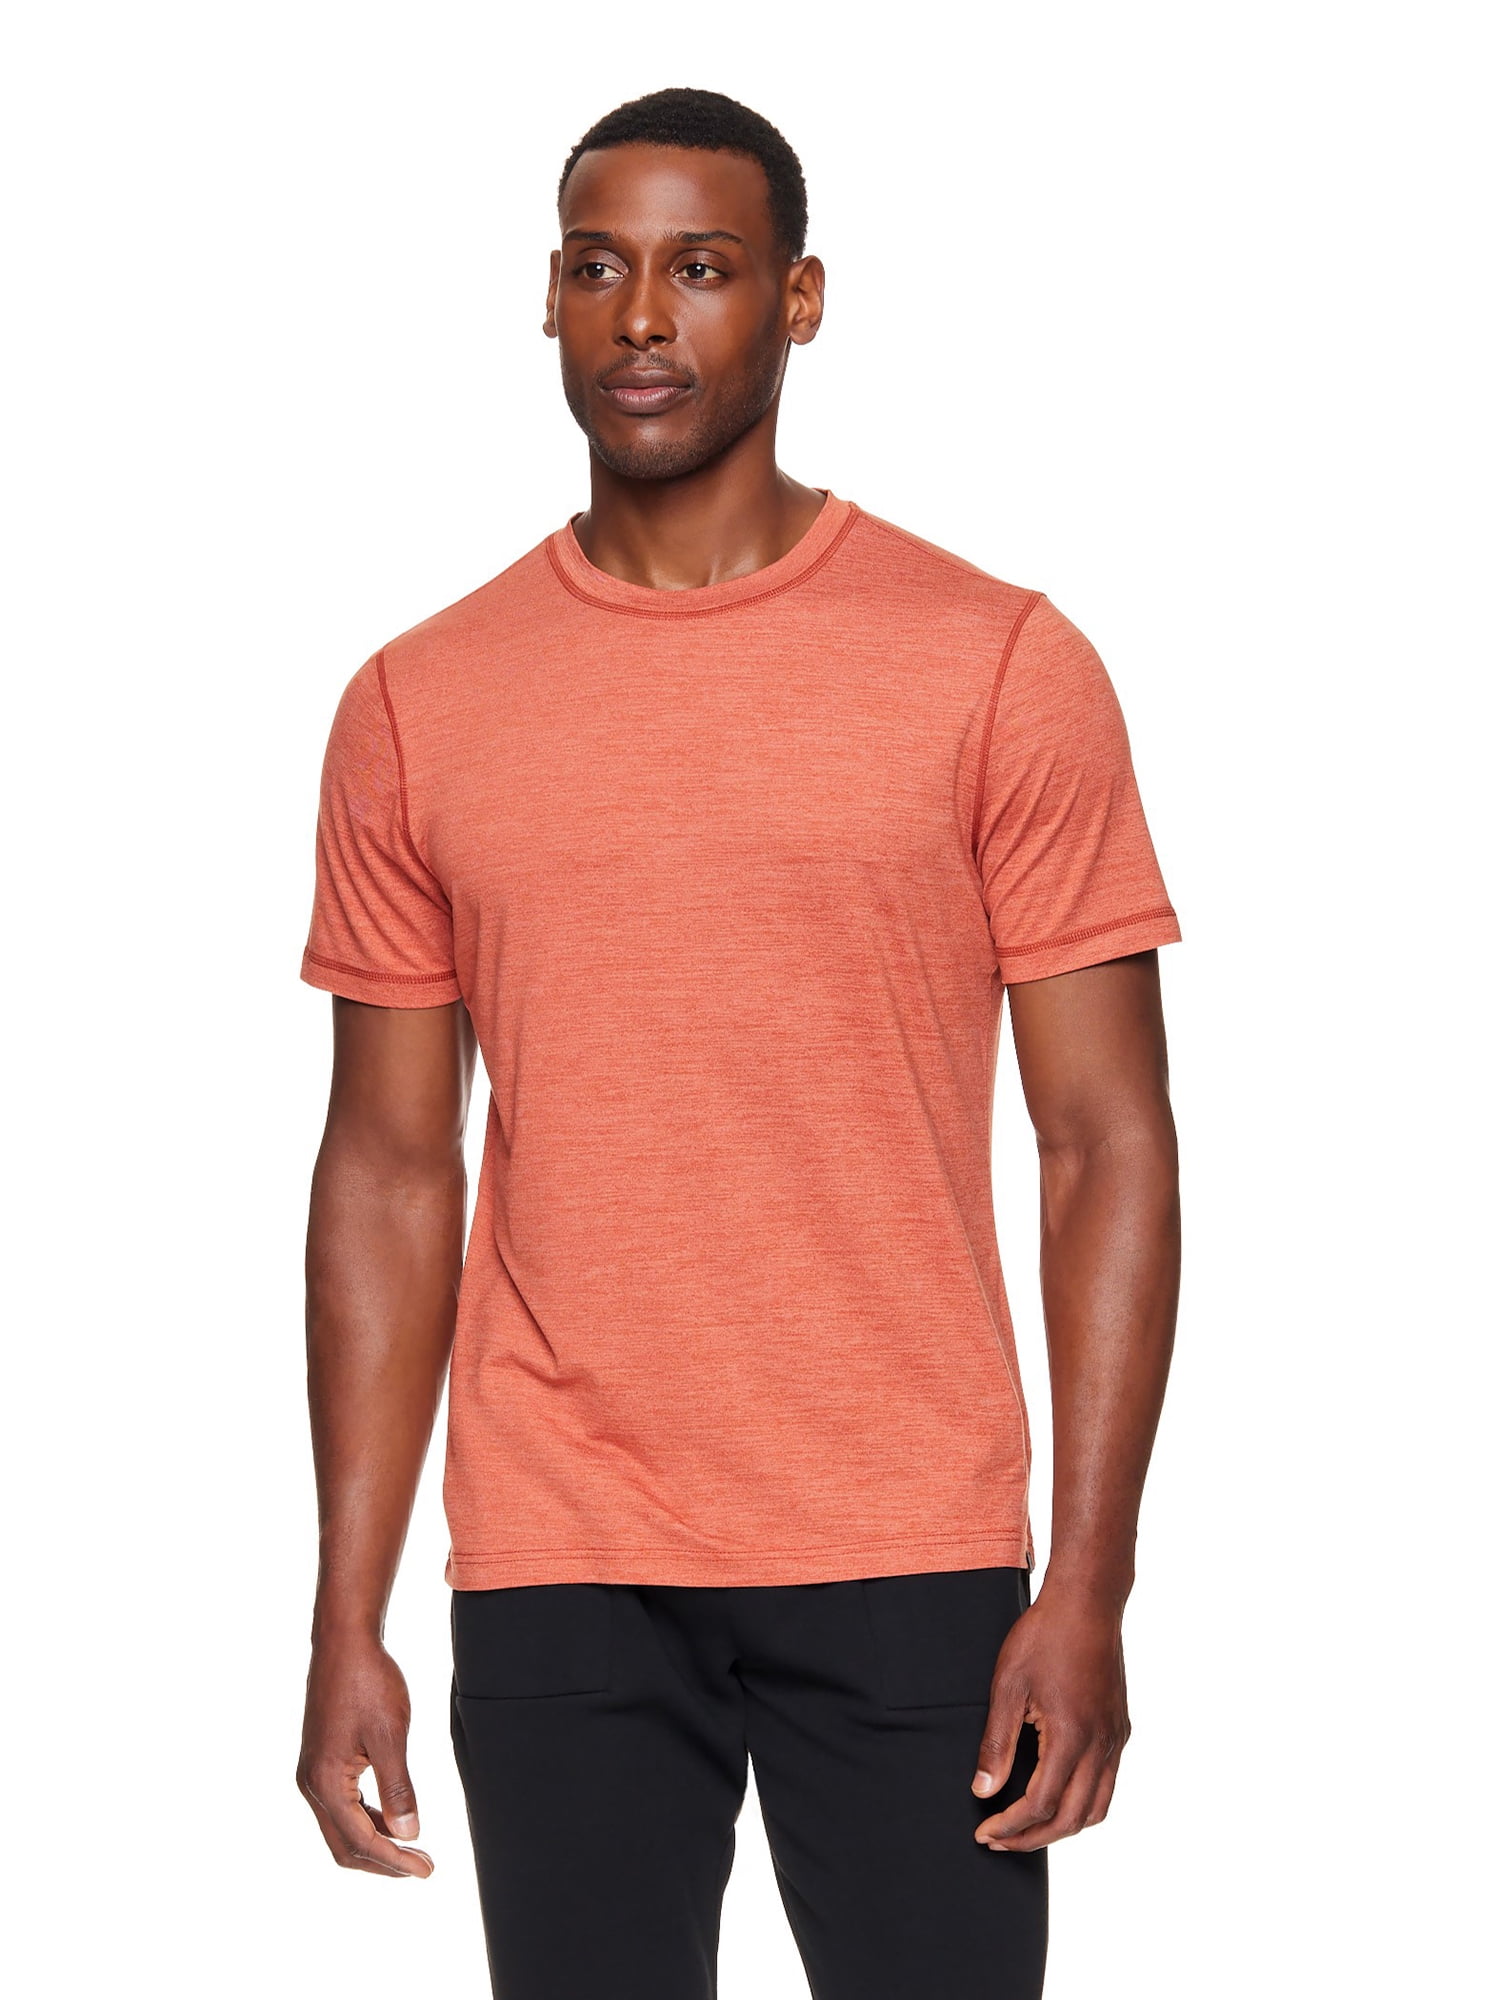 GAIAM Gray Active T-Shirt Size XL - 50% off